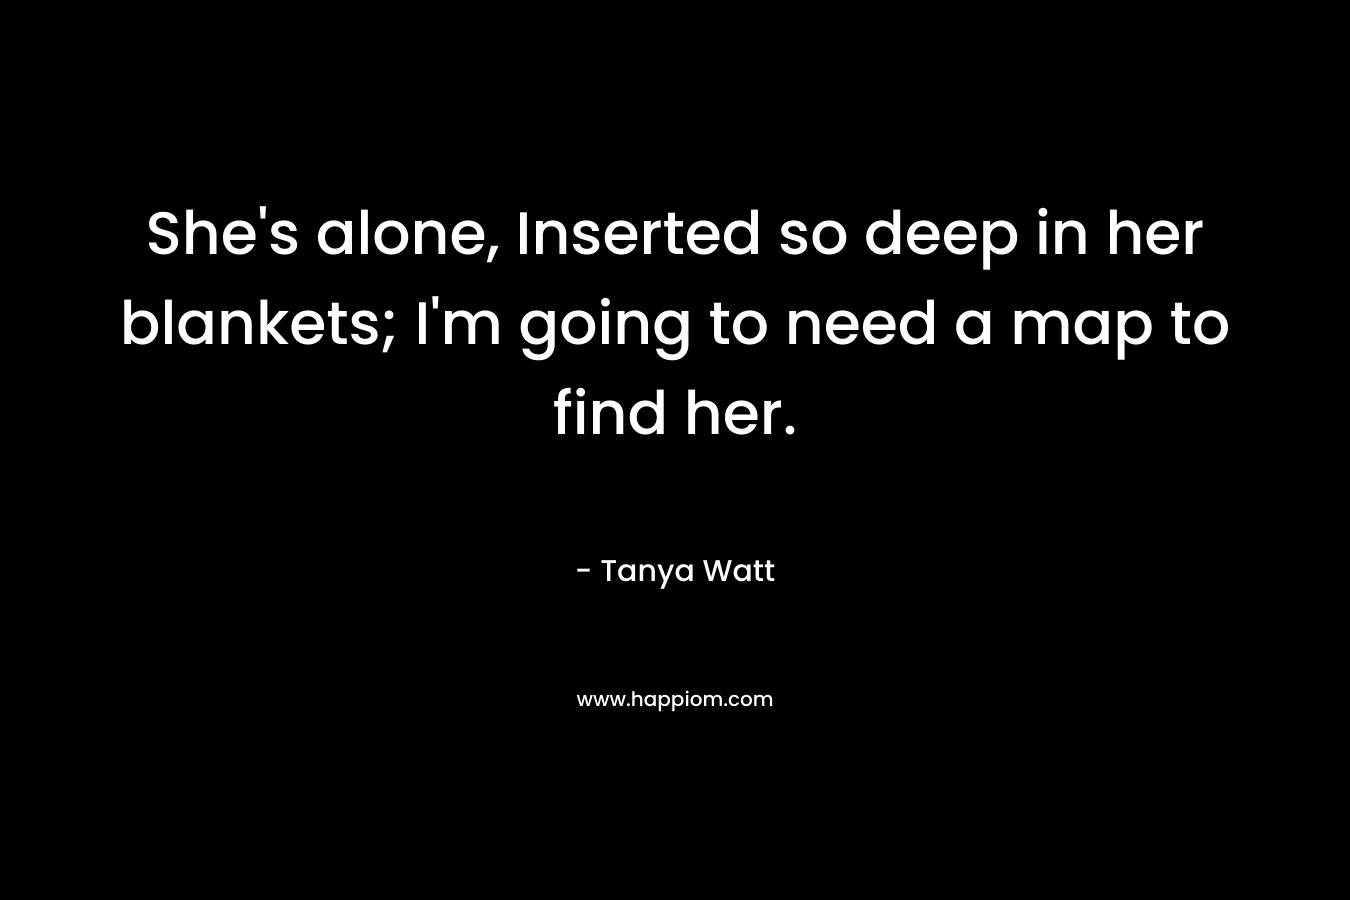 She’s alone, Inserted so deep in her blankets; I’m going to need a map to find her. – Tanya Watt